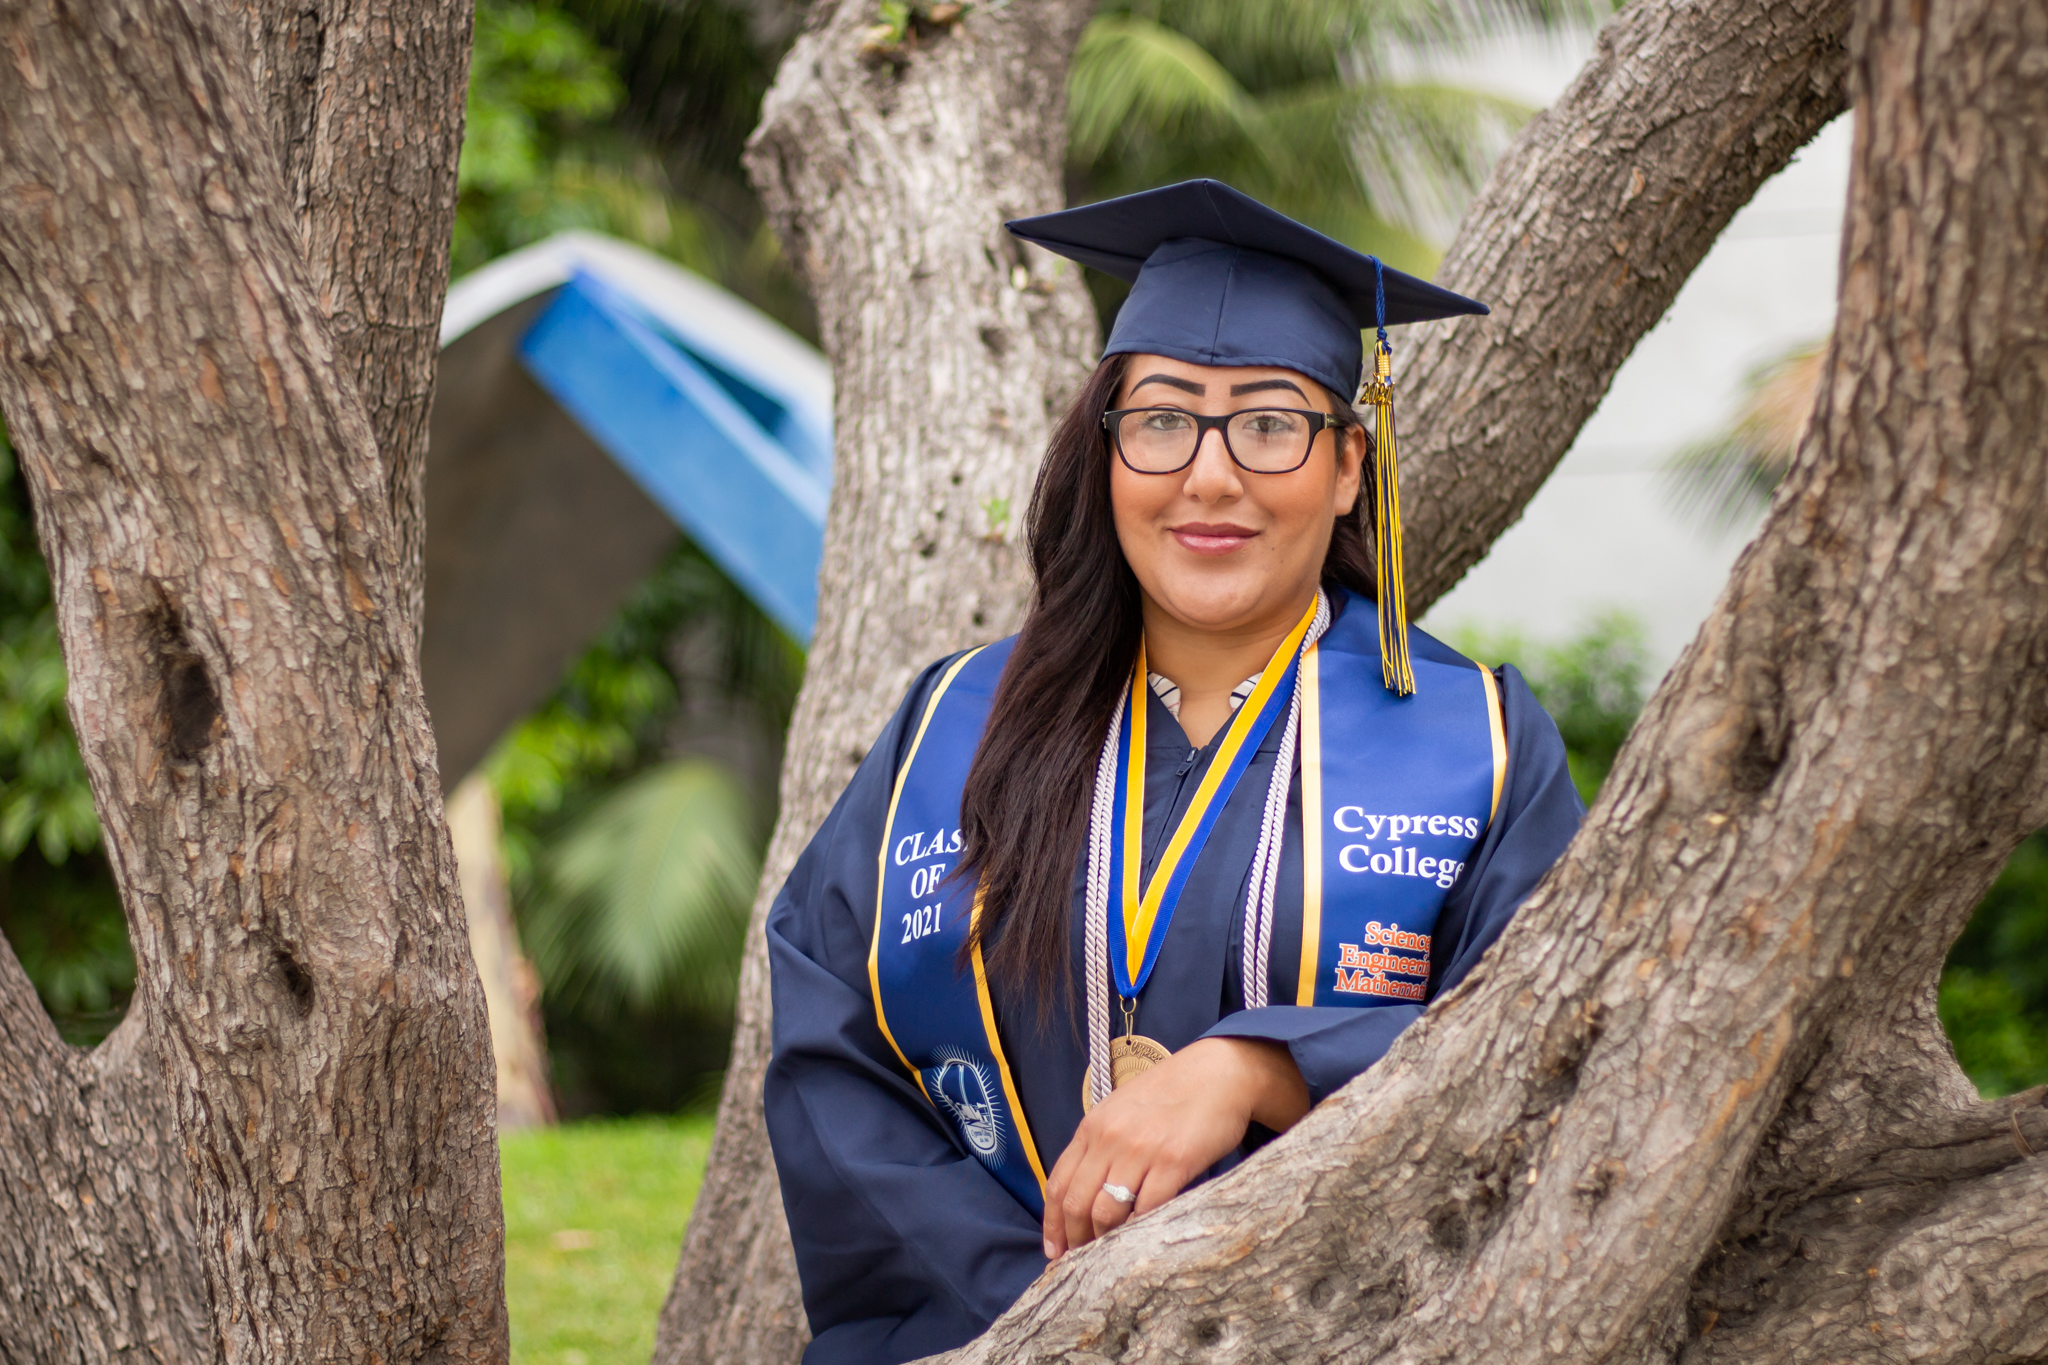 CYProud Student Melissa Whitewater wears graduation regalia and stands by a tree on the Cypress College campus.